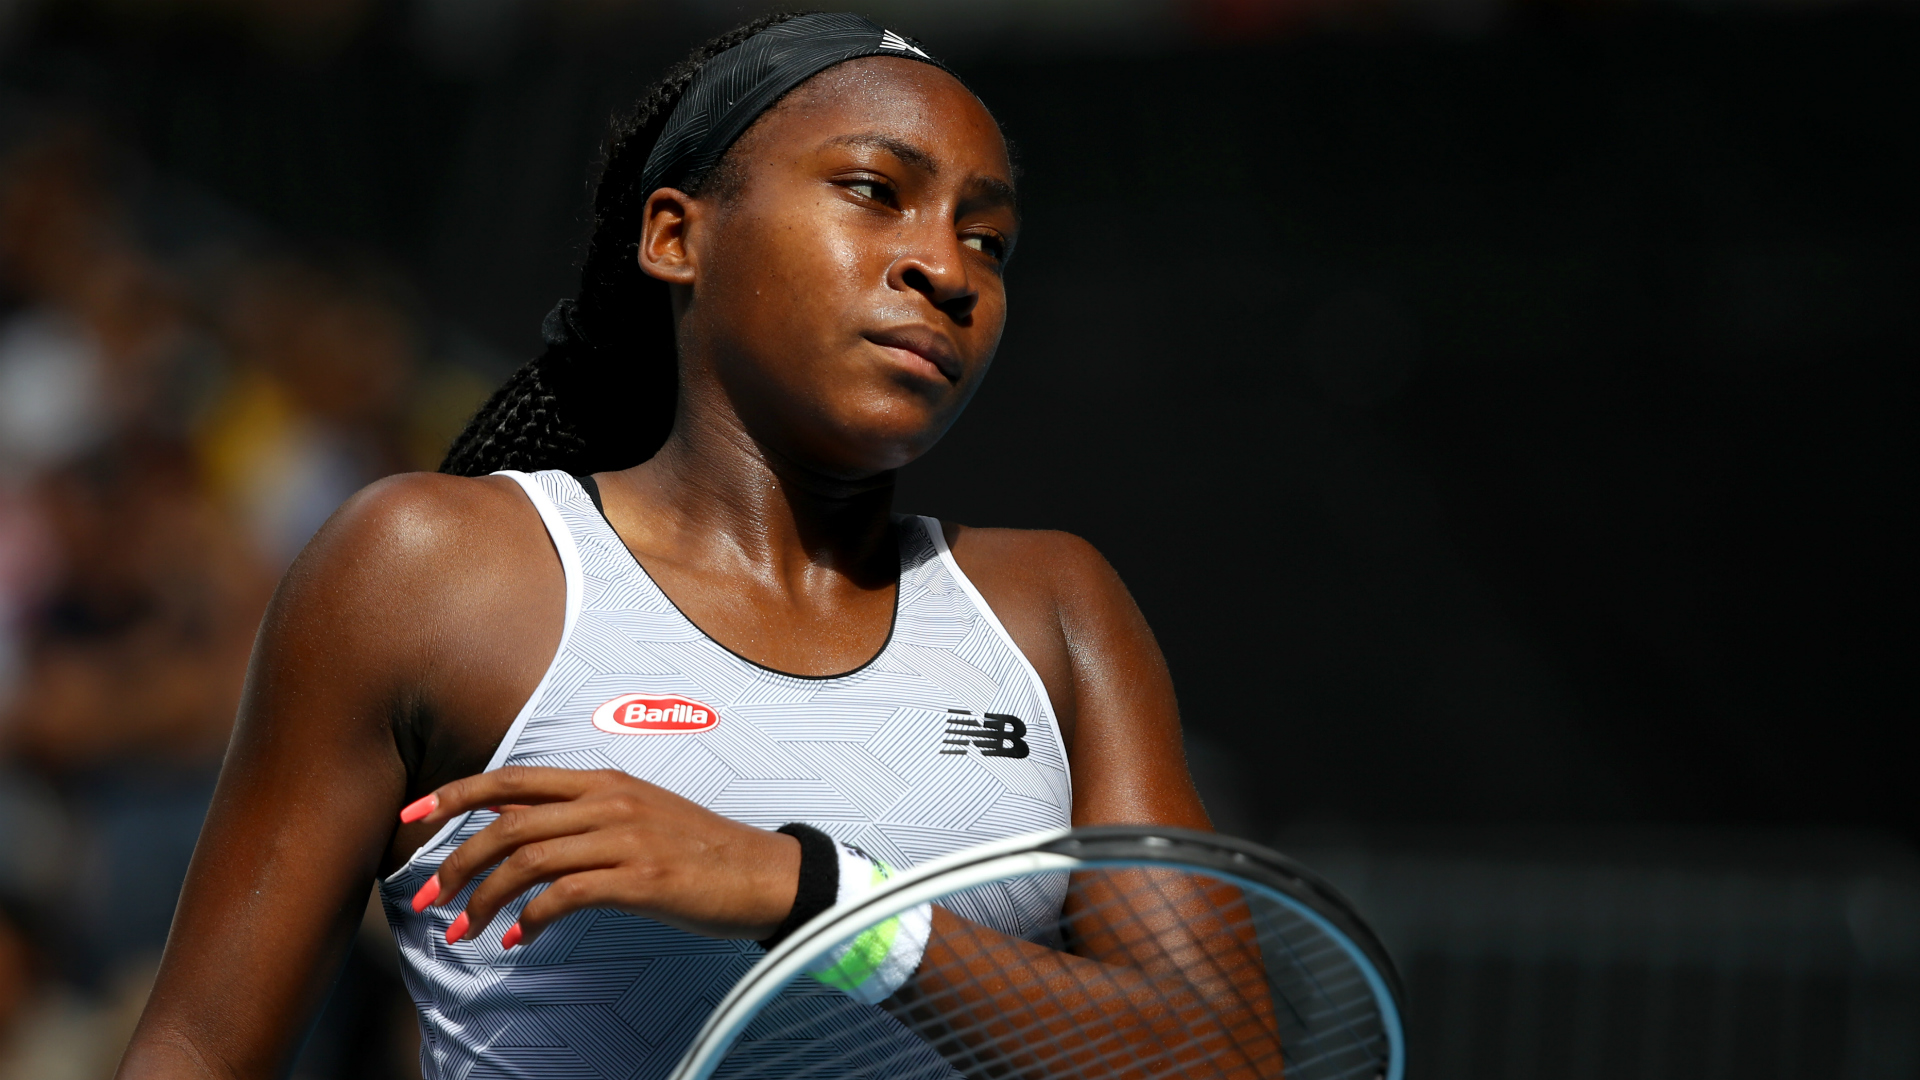 Australian Open 2020: Coco Gauff eyeing Tokyo Olympics after fairytale run ends in Melbourne